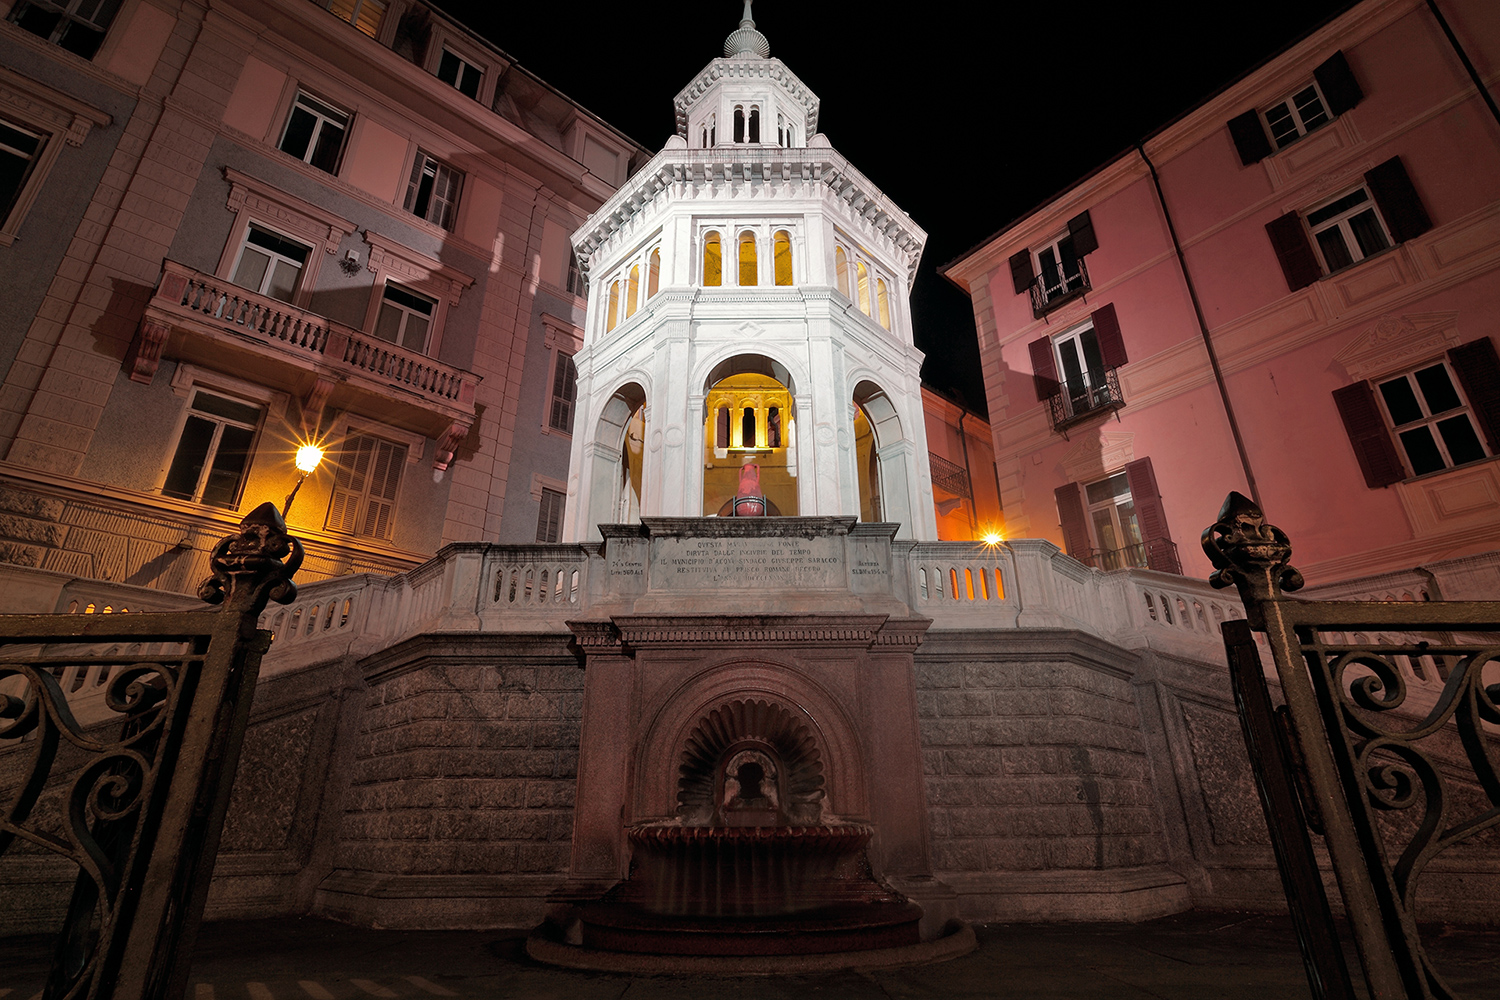 The Aedicule, built in the 19th century, emphasizes the importance of thermal water in Piazza Bollente.